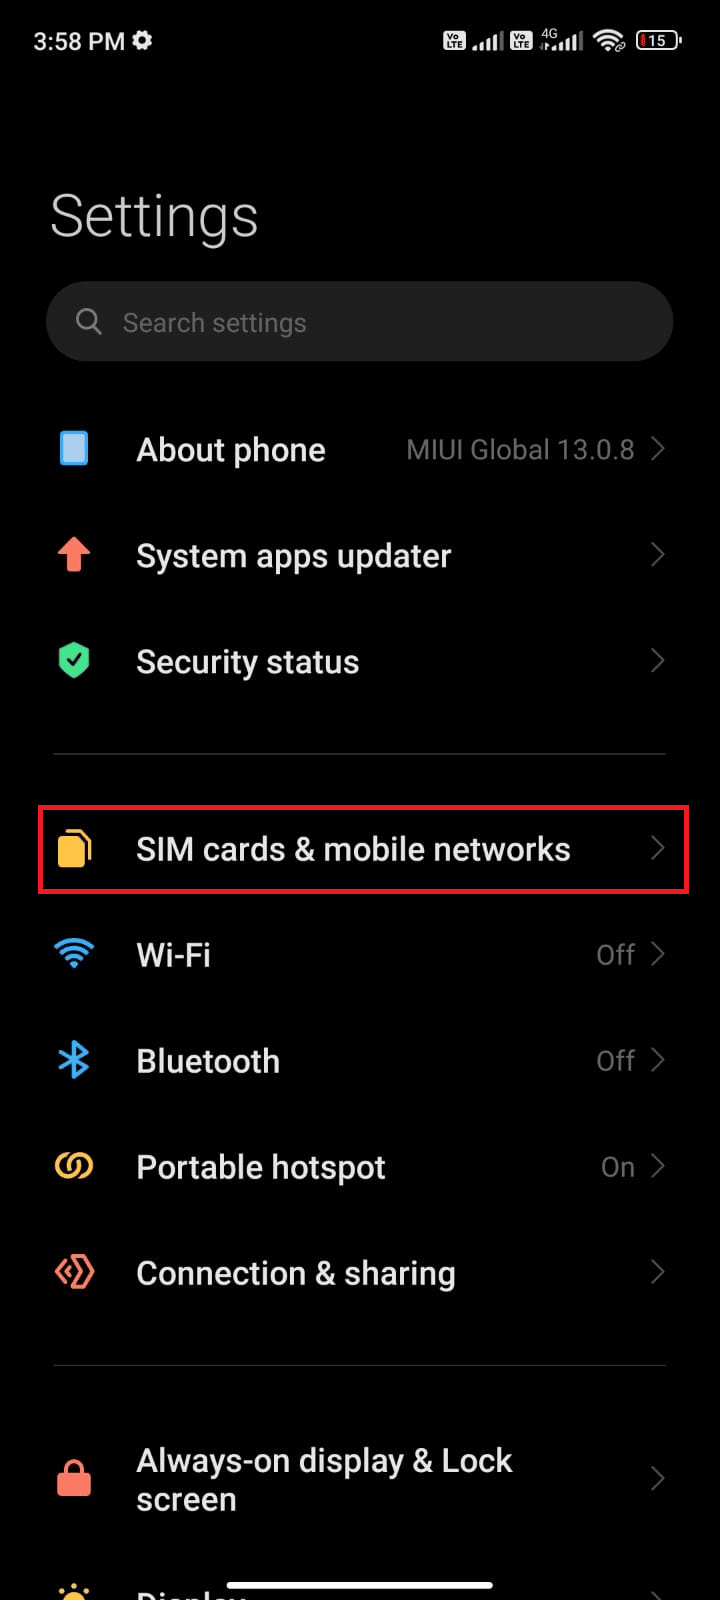 tap the SIM cards mobile networks option. Fix Google Play Store Error Checking for Updates